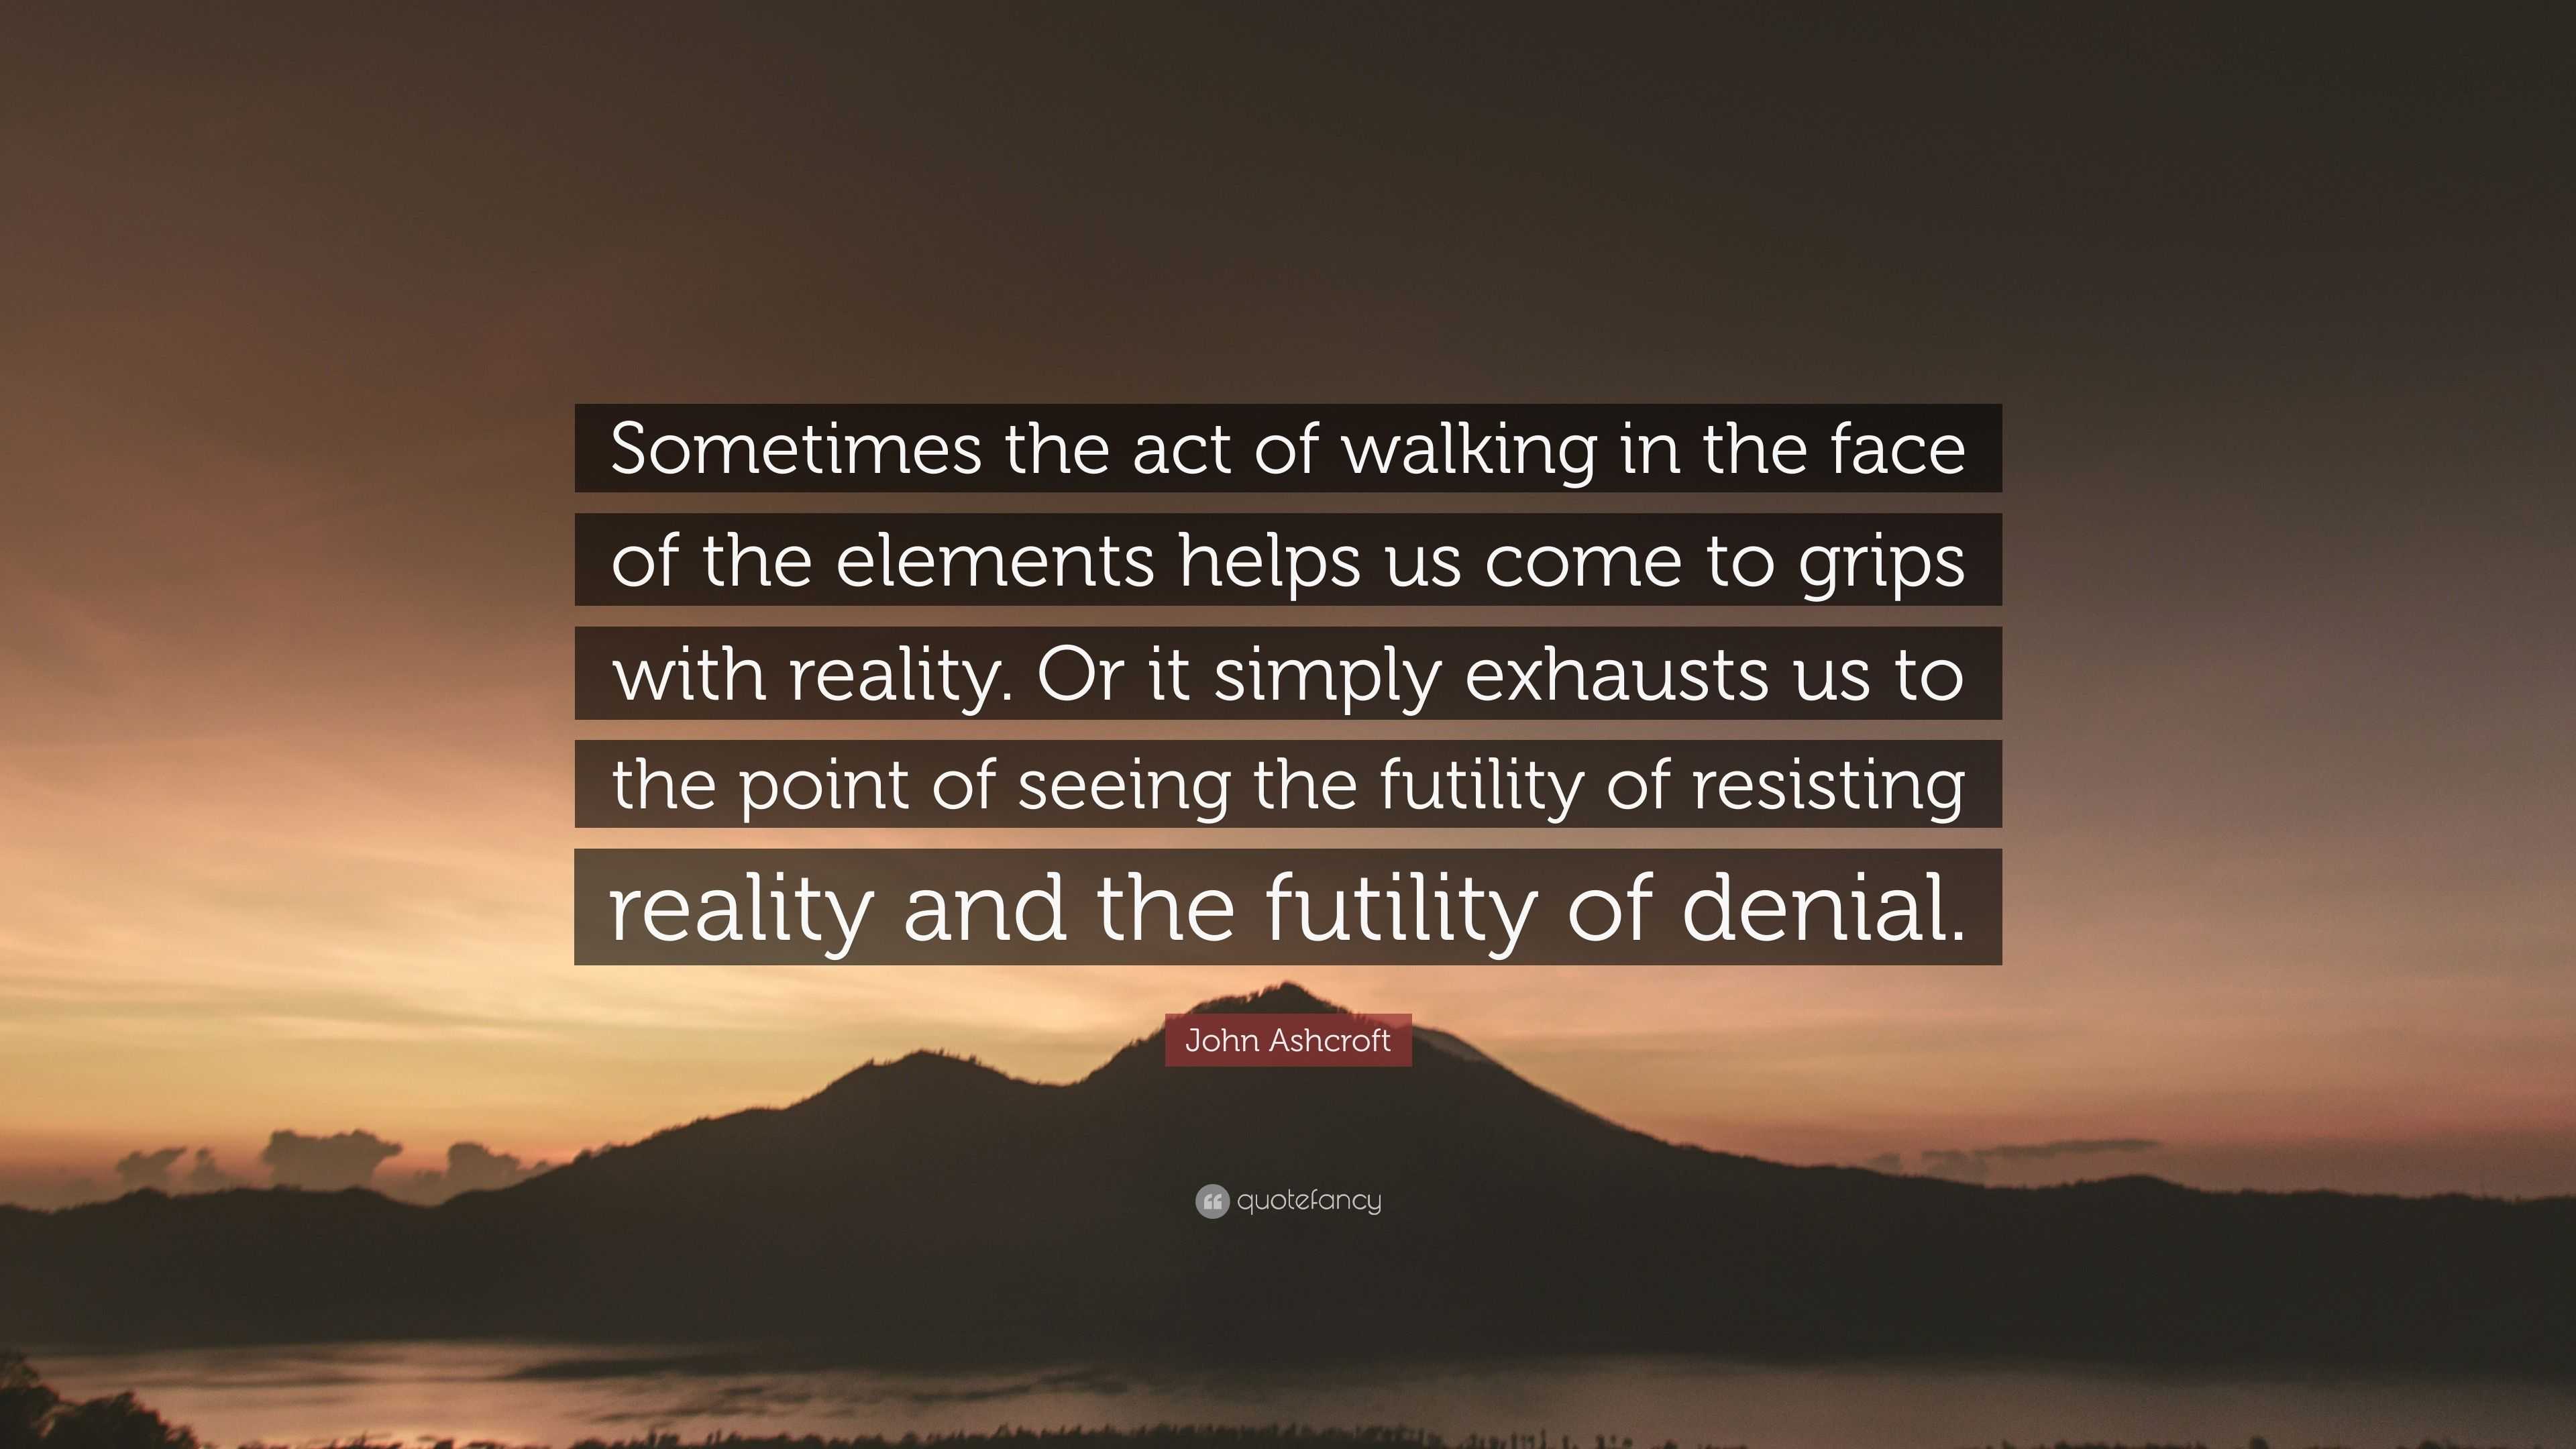 John Ashcroft “Sometimes the act of walking the face of the elements helps us come to grips with reality. Or it simply exhausts us t...”